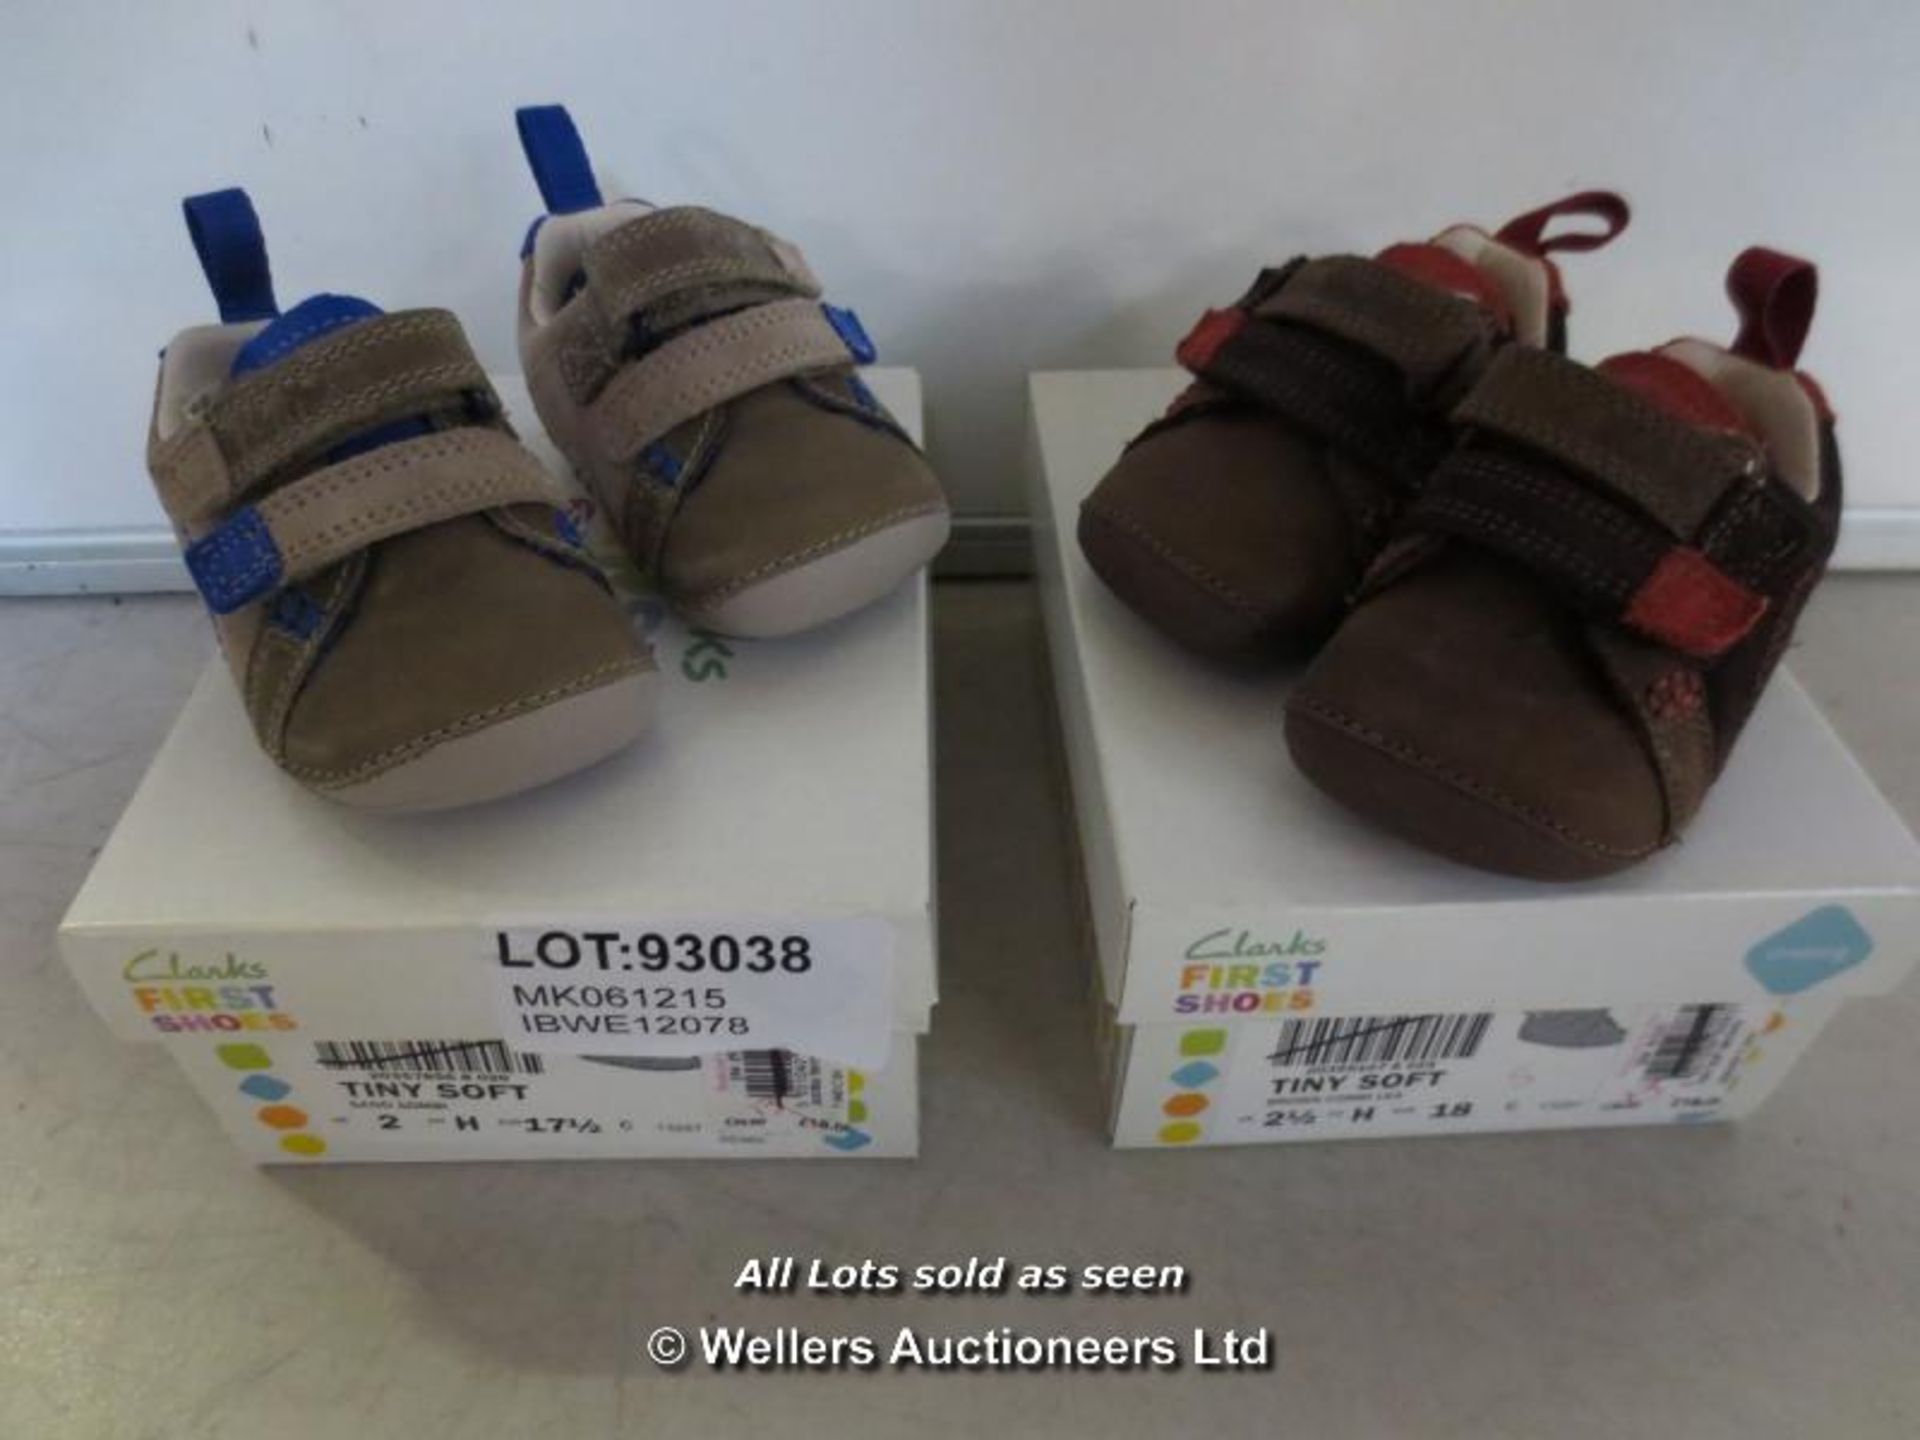 2X CLARKES FIRST SHOES INC TINY SOFT 2H & 2.5H / GRADE: BRAND NEW / BOXED (DC1) {AISLE '2'} [1425][